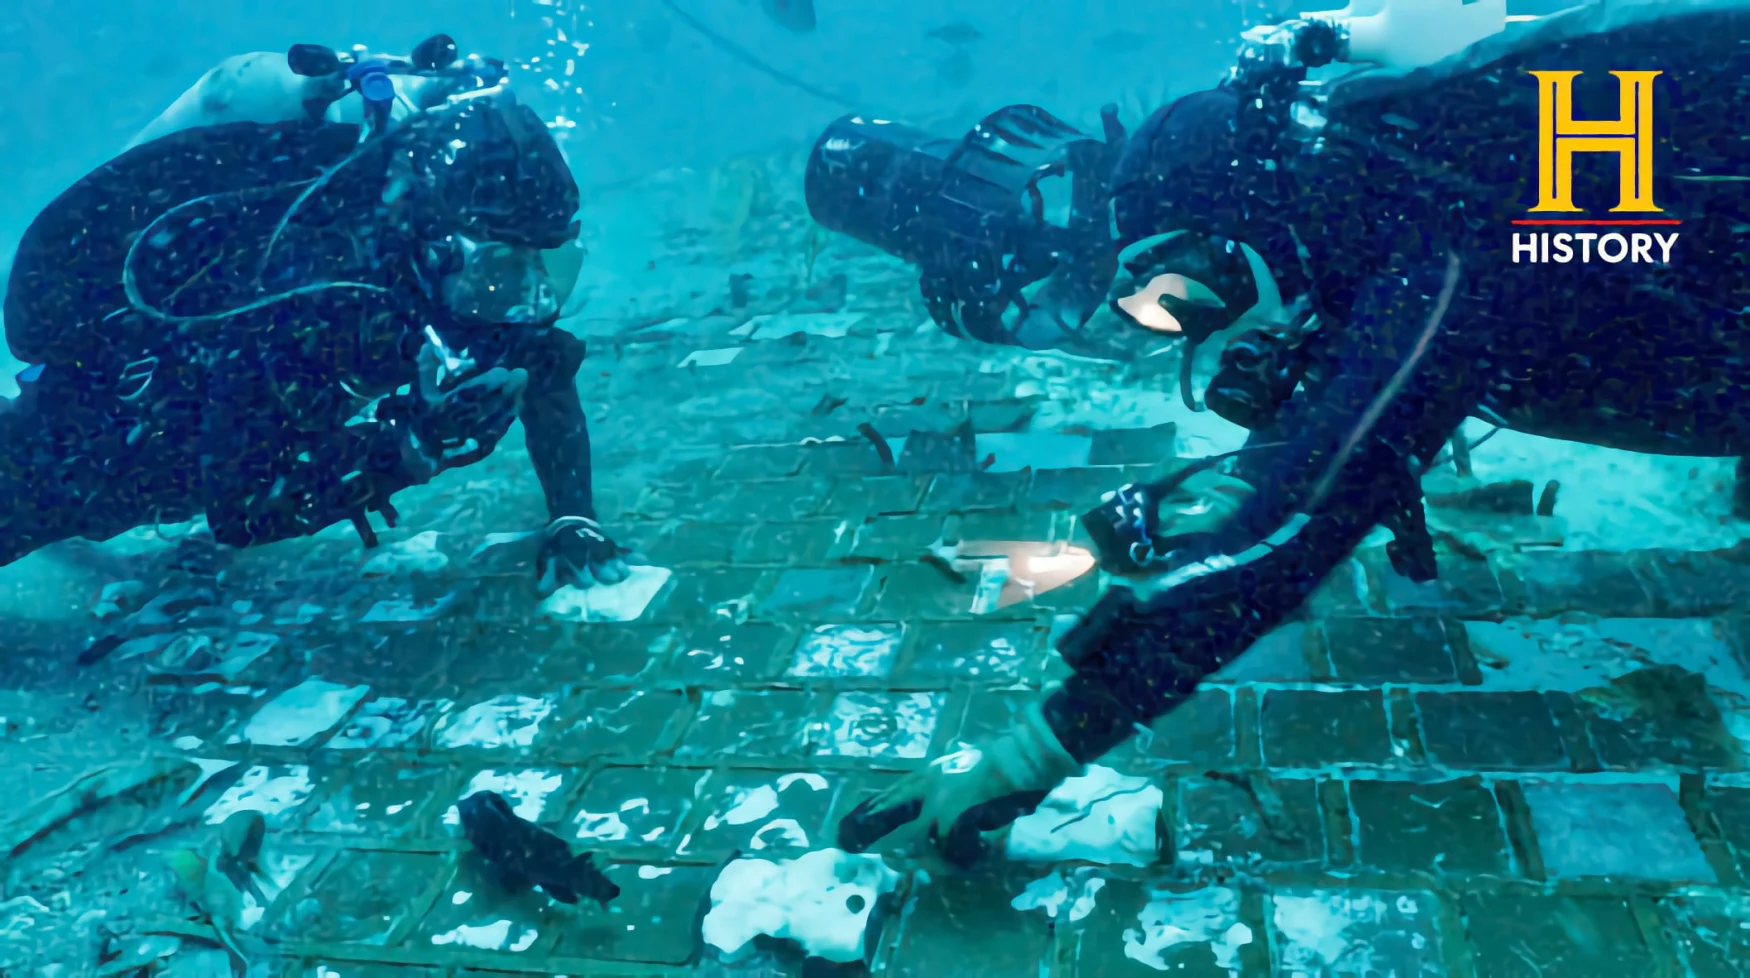 Divers newly discovered wreckage of the space shuttle Challenger.